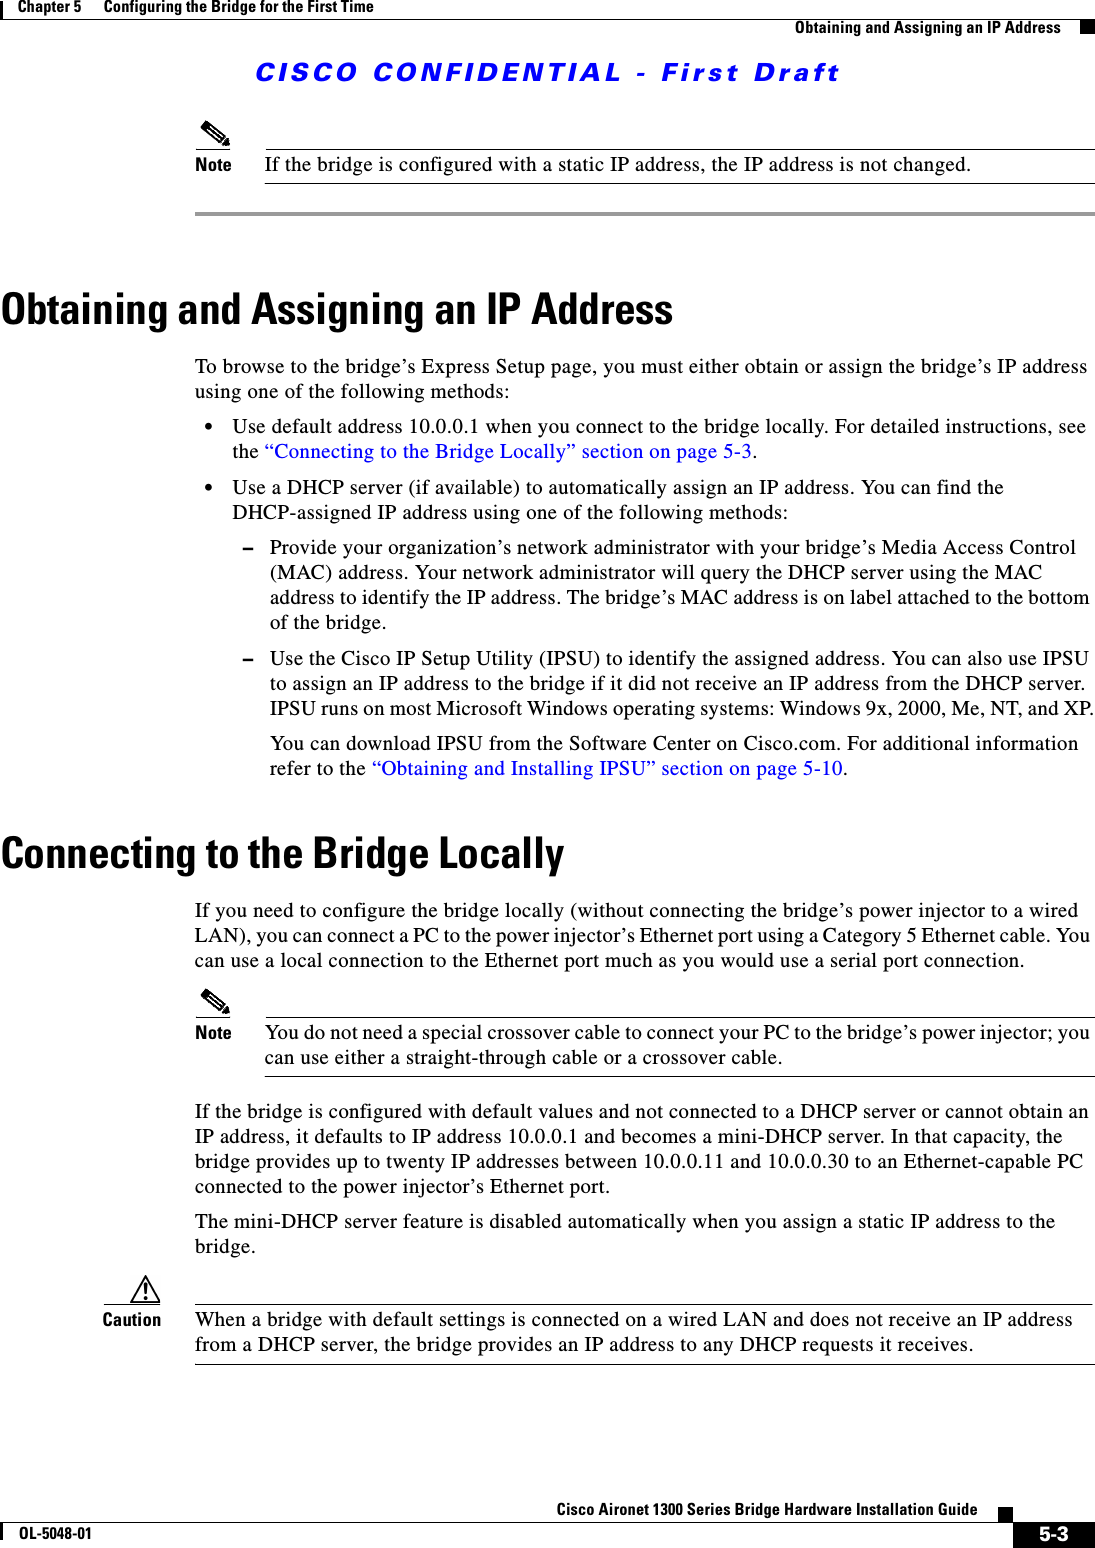 CISCO CONFIDENTIAL - First Draft5-3Cisco Aironet 1300 Series Bridge Hardware Installation GuideOL-5048-01Chapter 5      Configuring the Bridge for the First TimeObtaining and Assigning an IP AddressNote If the bridge is configured with a static IP address, the IP address is not changed.Obtaining and Assigning an IP AddressTo browse to the bridge’s Express Setup page, you must either obtain or assign the bridge’s IP address using one of the following methods:•Use default address 10.0.0.1 when you connect to the bridge locally. For detailed instructions, see the “Connecting to the Bridge Locally” section on page 5-3.•Use a DHCP server (if available) to automatically assign an IP address. You can find the DHCP-assigned IP address using one of the following methods:–Provide your organization’s network administrator with your bridge’s Media Access Control (MAC) address. Your network administrator will query the DHCP server using the MAC address to identify the IP address. The bridge’s MAC address is on label attached to the bottom of the bridge.–Use the Cisco IP Setup Utility (IPSU) to identify the assigned address. You can also use IPSU to assign an IP address to the bridge if it did not receive an IP address from the DHCP server. IPSU runs on most Microsoft Windows operating systems: Windows 9x, 2000, Me, NT, and XP.You can download IPSU from the Software Center on Cisco.com. For additional information refer to the “Obtaining and Installing IPSU” section on page 5-10.Connecting to the Bridge LocallyIf you need to configure the bridge locally (without connecting the bridge’s power injector to a wired LAN), you can connect a PC to the power injector’s Ethernet port using a Category 5 Ethernet cable. You can use a local connection to the Ethernet port much as you would use a serial port connection.Note You do not need a special crossover cable to connect your PC to the bridge’s power injector; you can use either a straight-through cable or a crossover cable.If the bridge is configured with default values and not connected to a DHCP server or cannot obtain an IP address, it defaults to IP address 10.0.0.1 and becomes a mini-DHCP server. In that capacity, the bridge provides up to twenty IP addresses between 10.0.0.11 and 10.0.0.30 to an Ethernet-capable PC connected to the power injector’s Ethernet port.The mini-DHCP server feature is disabled automatically when you assign a static IP address to the bridge.Caution When a bridge with default settings is connected on a wired LAN and does not receive an IP address from a DHCP server, the bridge provides an IP address to any DHCP requests it receives.